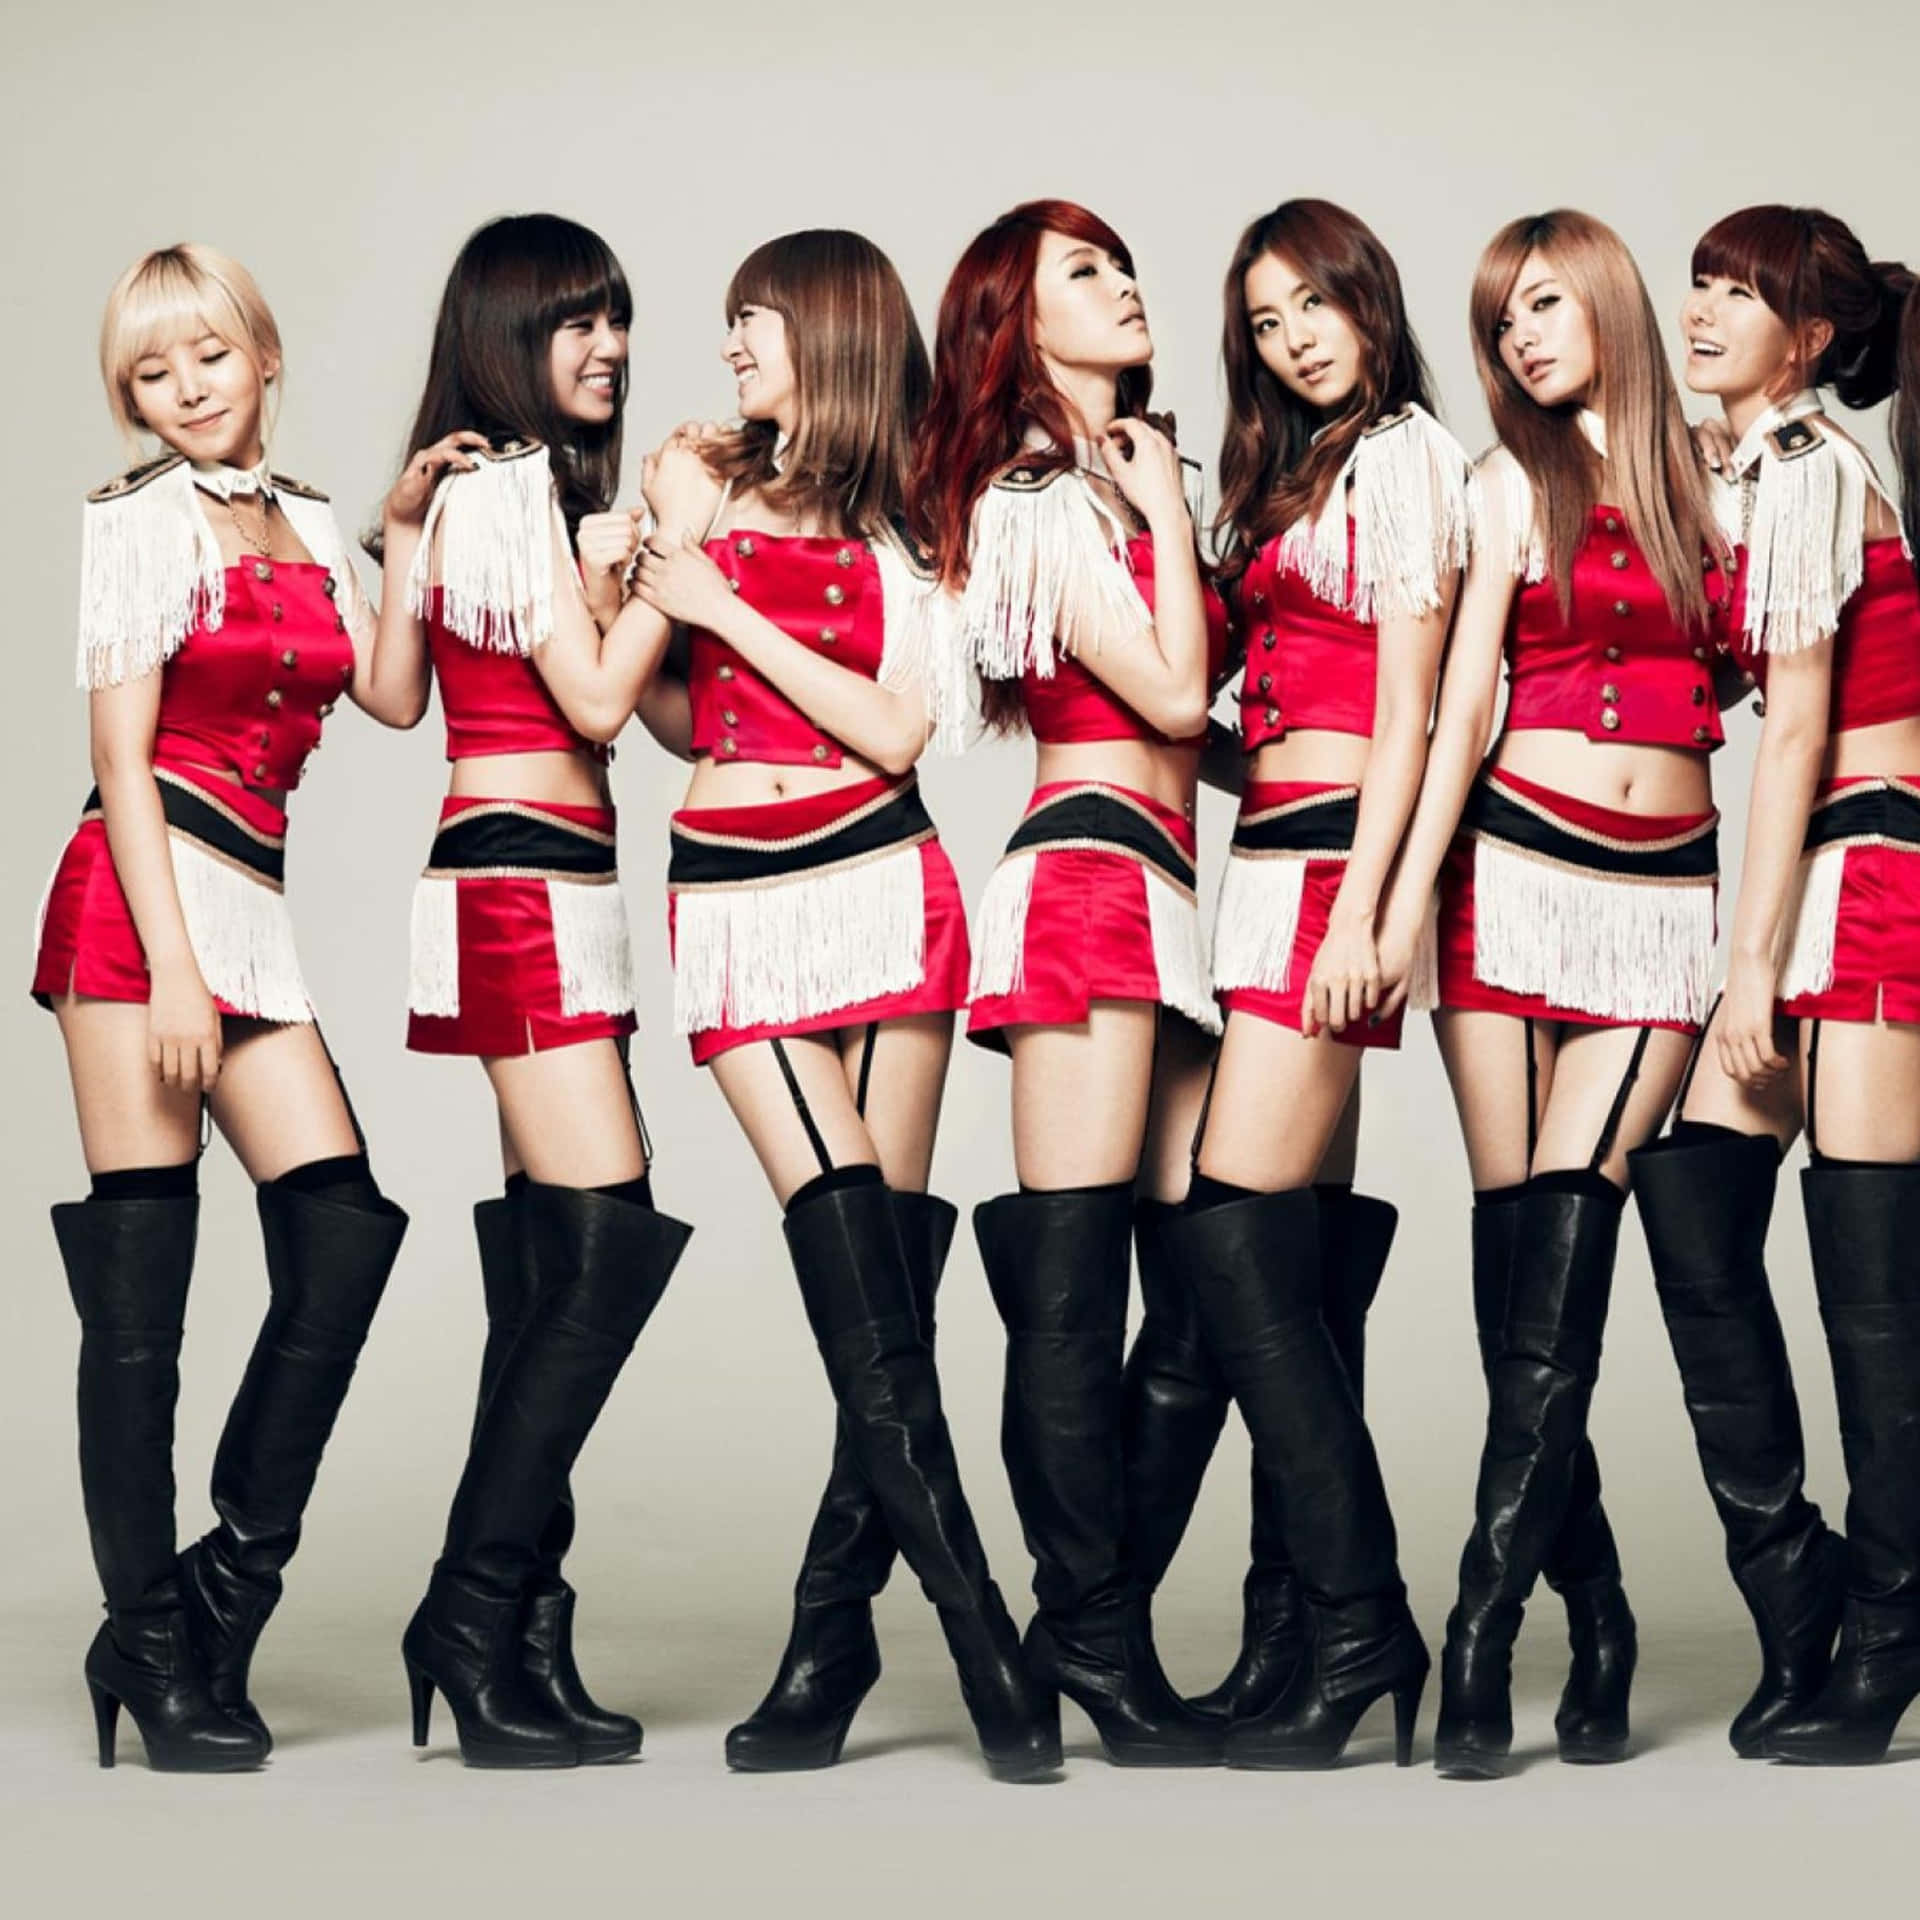 Kpop Group Redand White Outfits Wallpaper